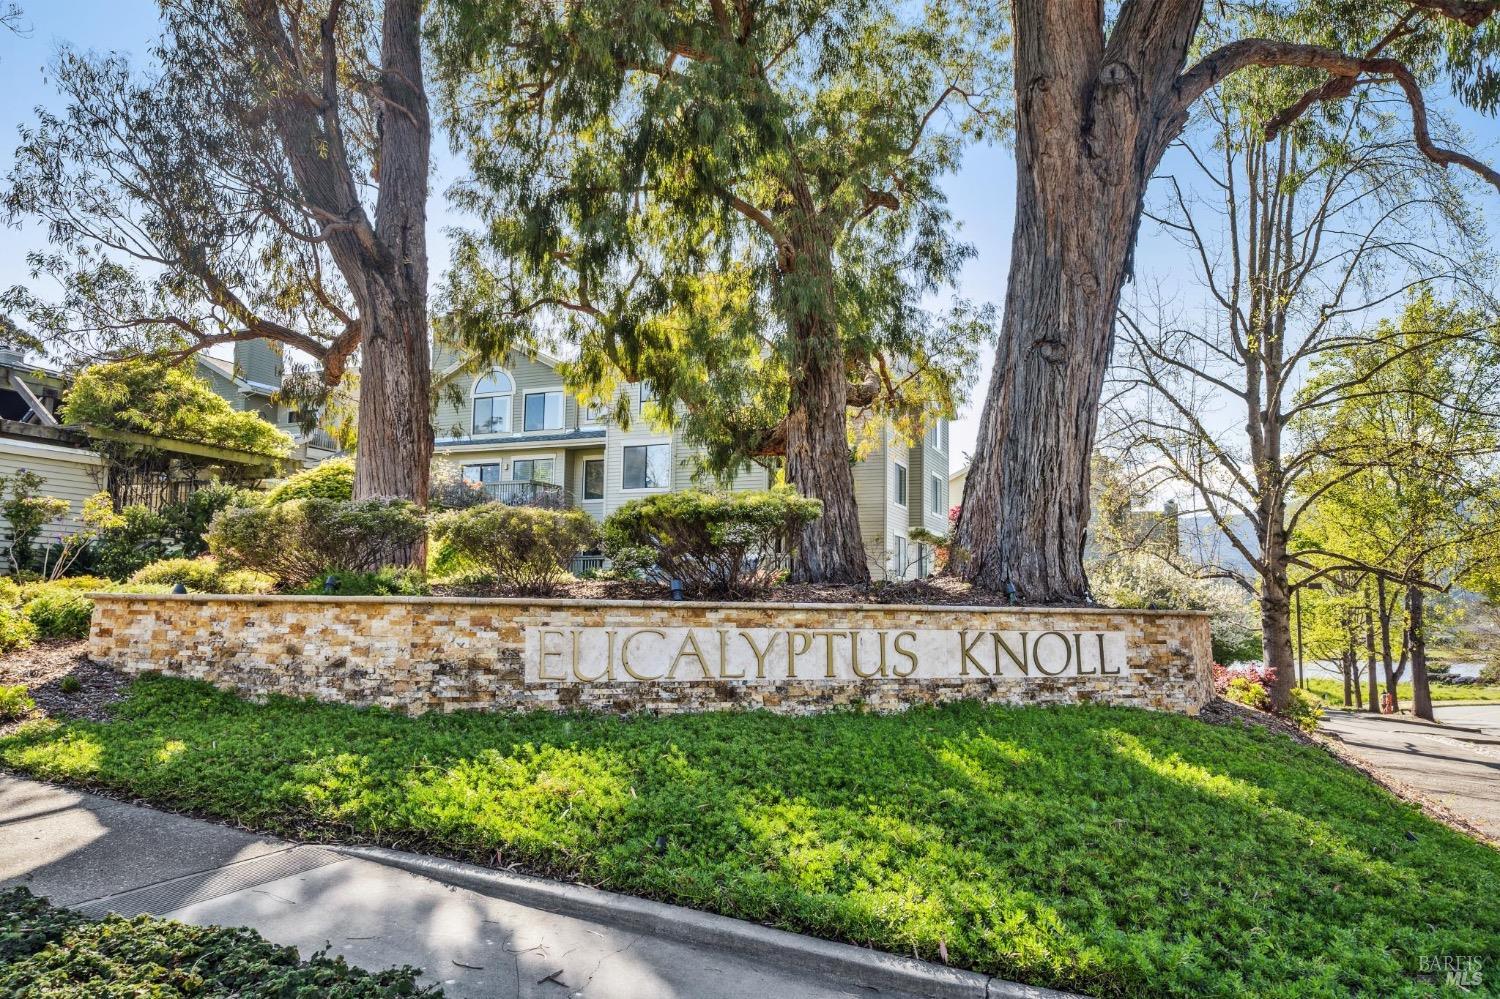 Photo of 111 Eucalyptus Knoll St in Mill Valley, CA